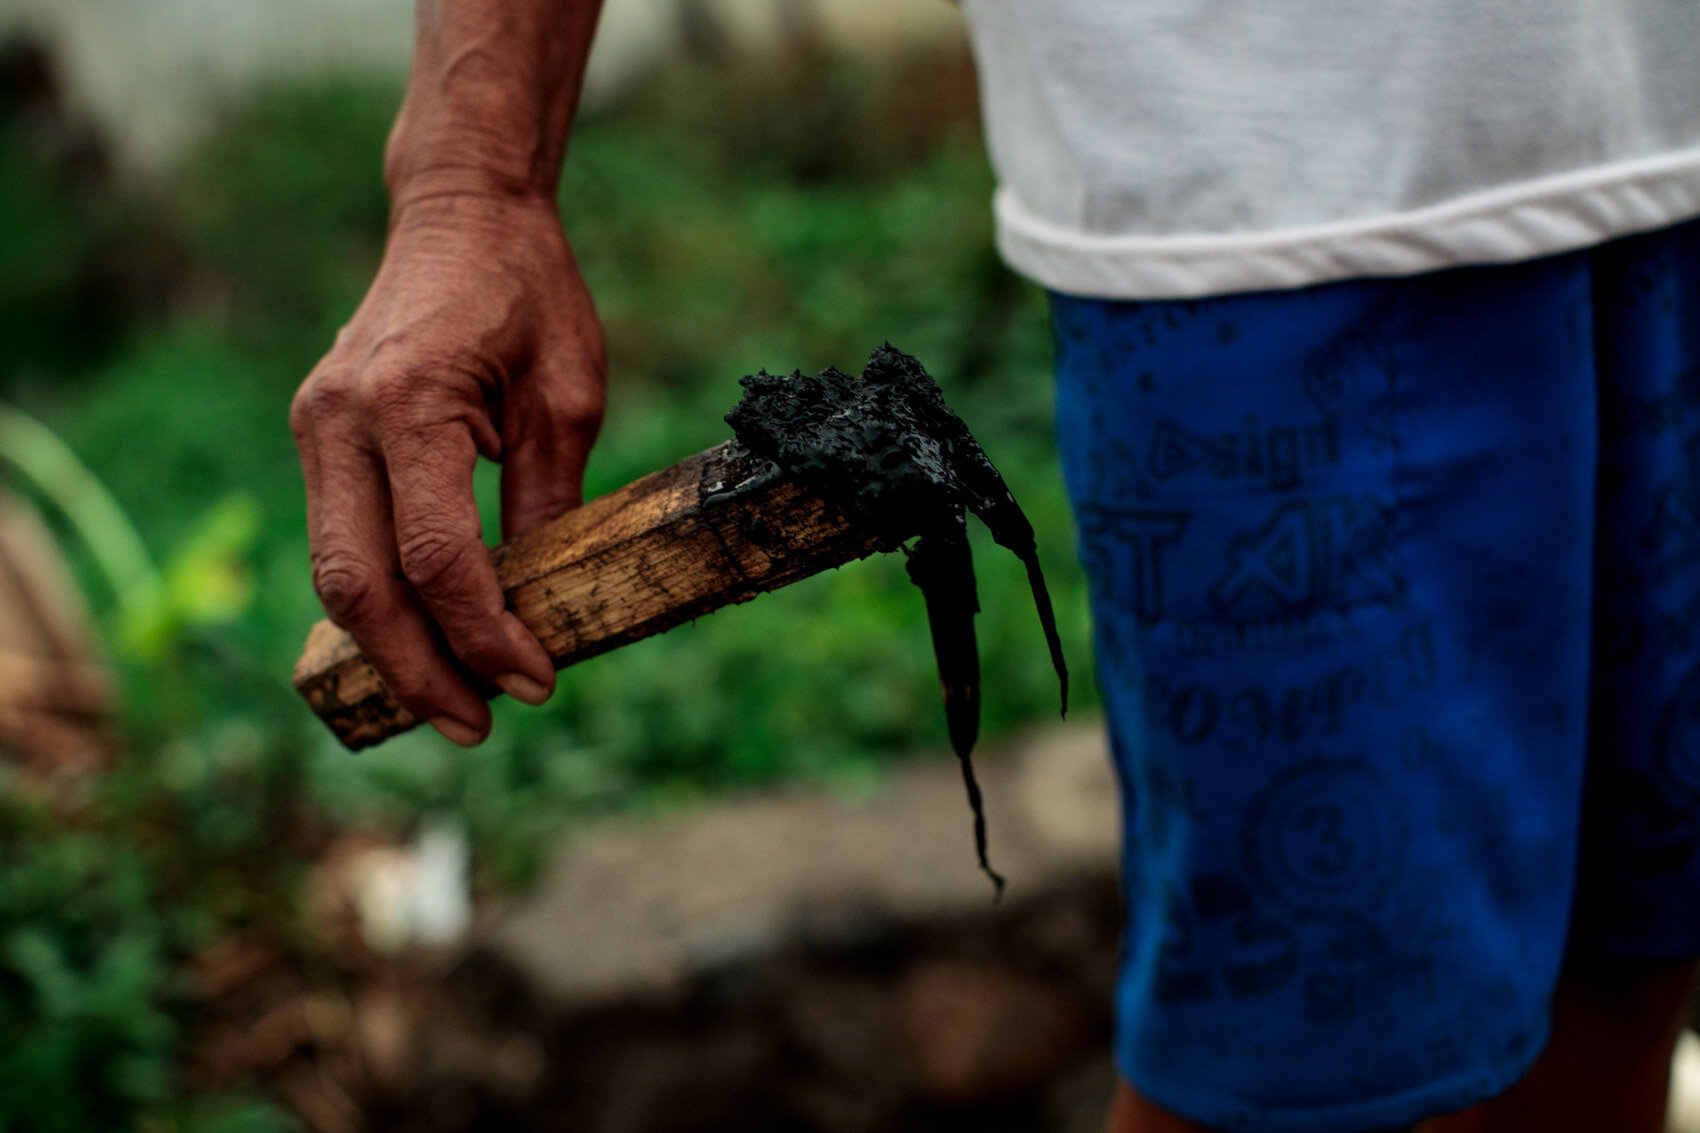  BANDUNG, INDONESIA: Former farmer Ade Traguna, 65, holds a stick covered in the black sludge collected from his rice paddies, on which he can no longer grow crops as result of the toxic water from the Citarum in Jelegong village on November 23, 2019